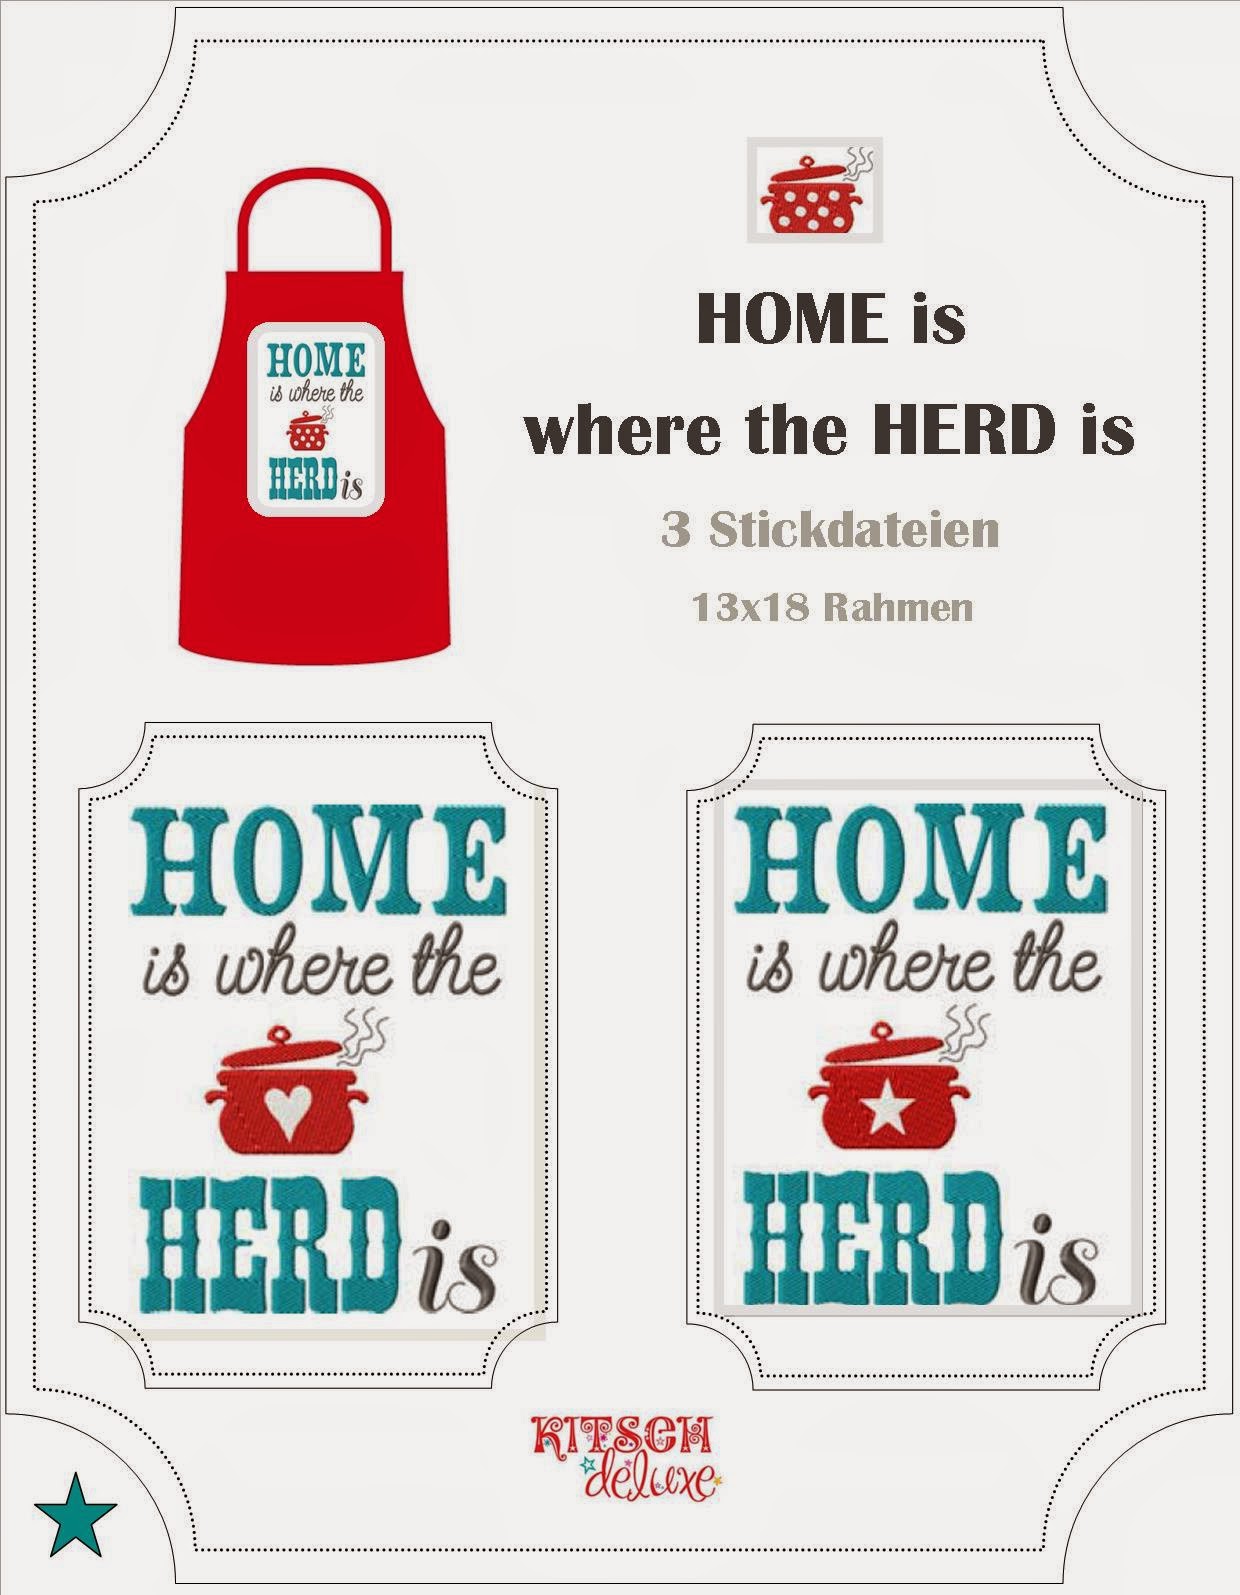 HOME is where the HERD is